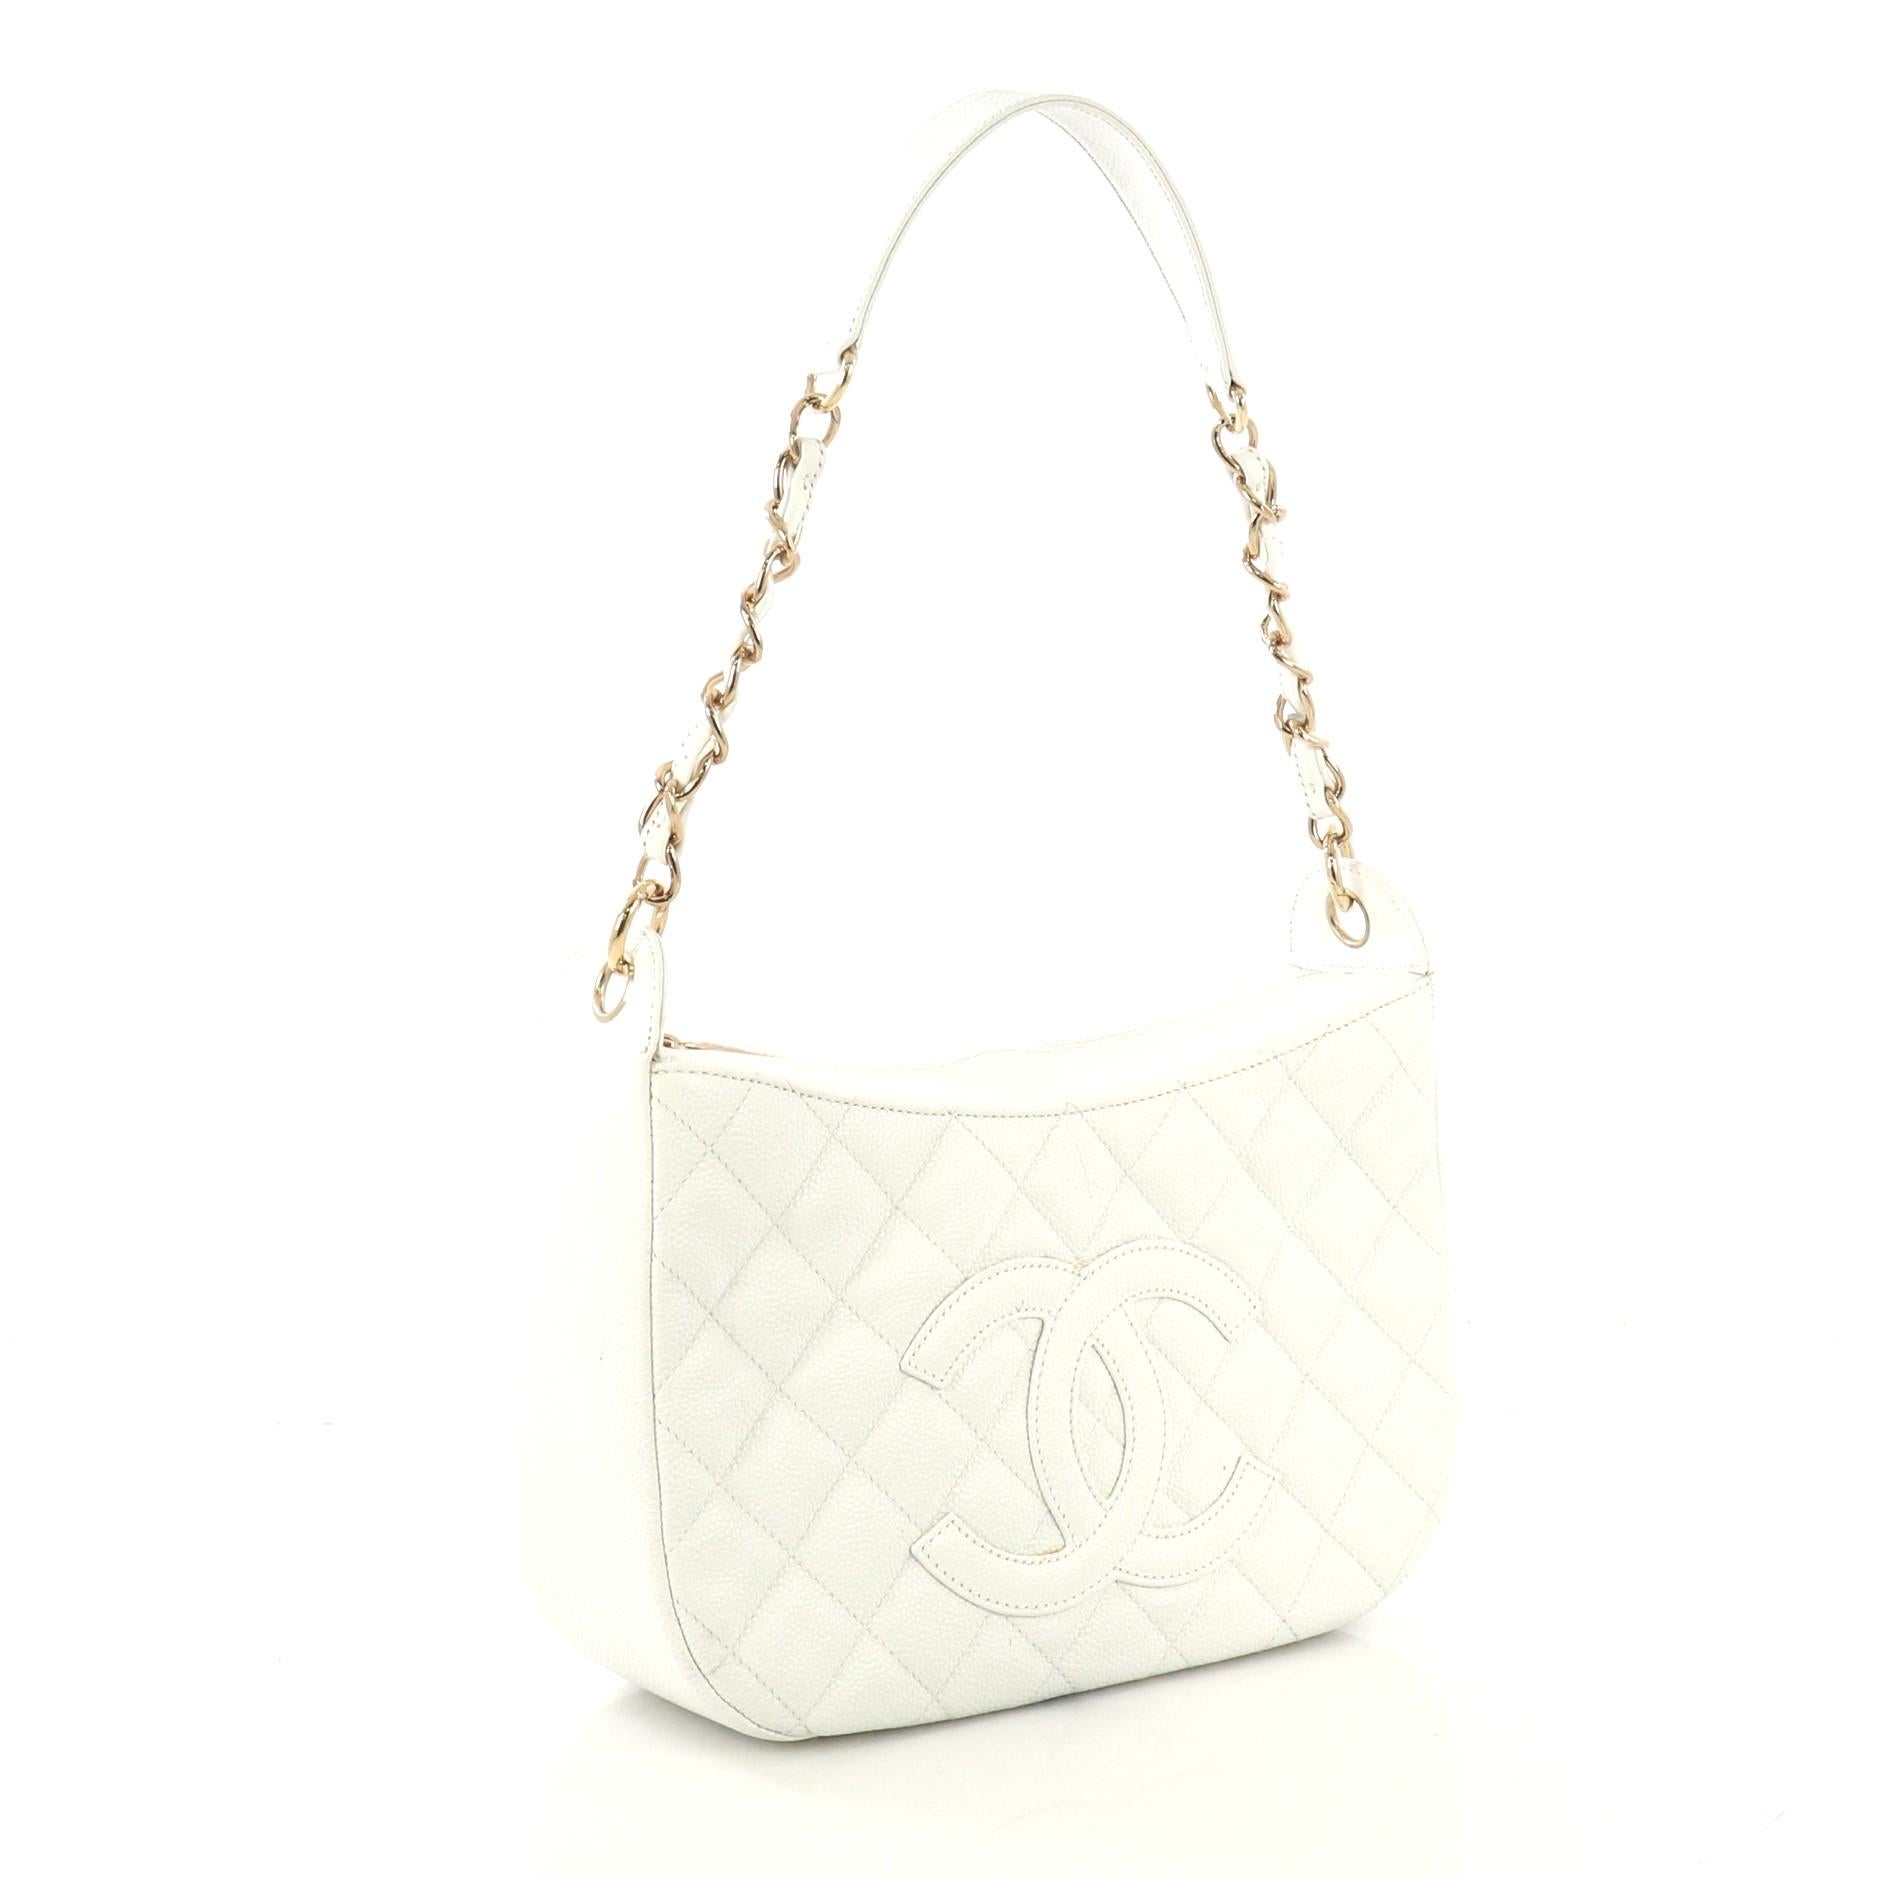 This Chanel Timeless CC Chain Shoulder Bag Quilted Caviar Medium, crafted from white quilted caviar leather, features woven-in leather chain strap with leather pad, CC stitched logo, exterior back slip pocket, and gold-tone hardware. Its zip closure